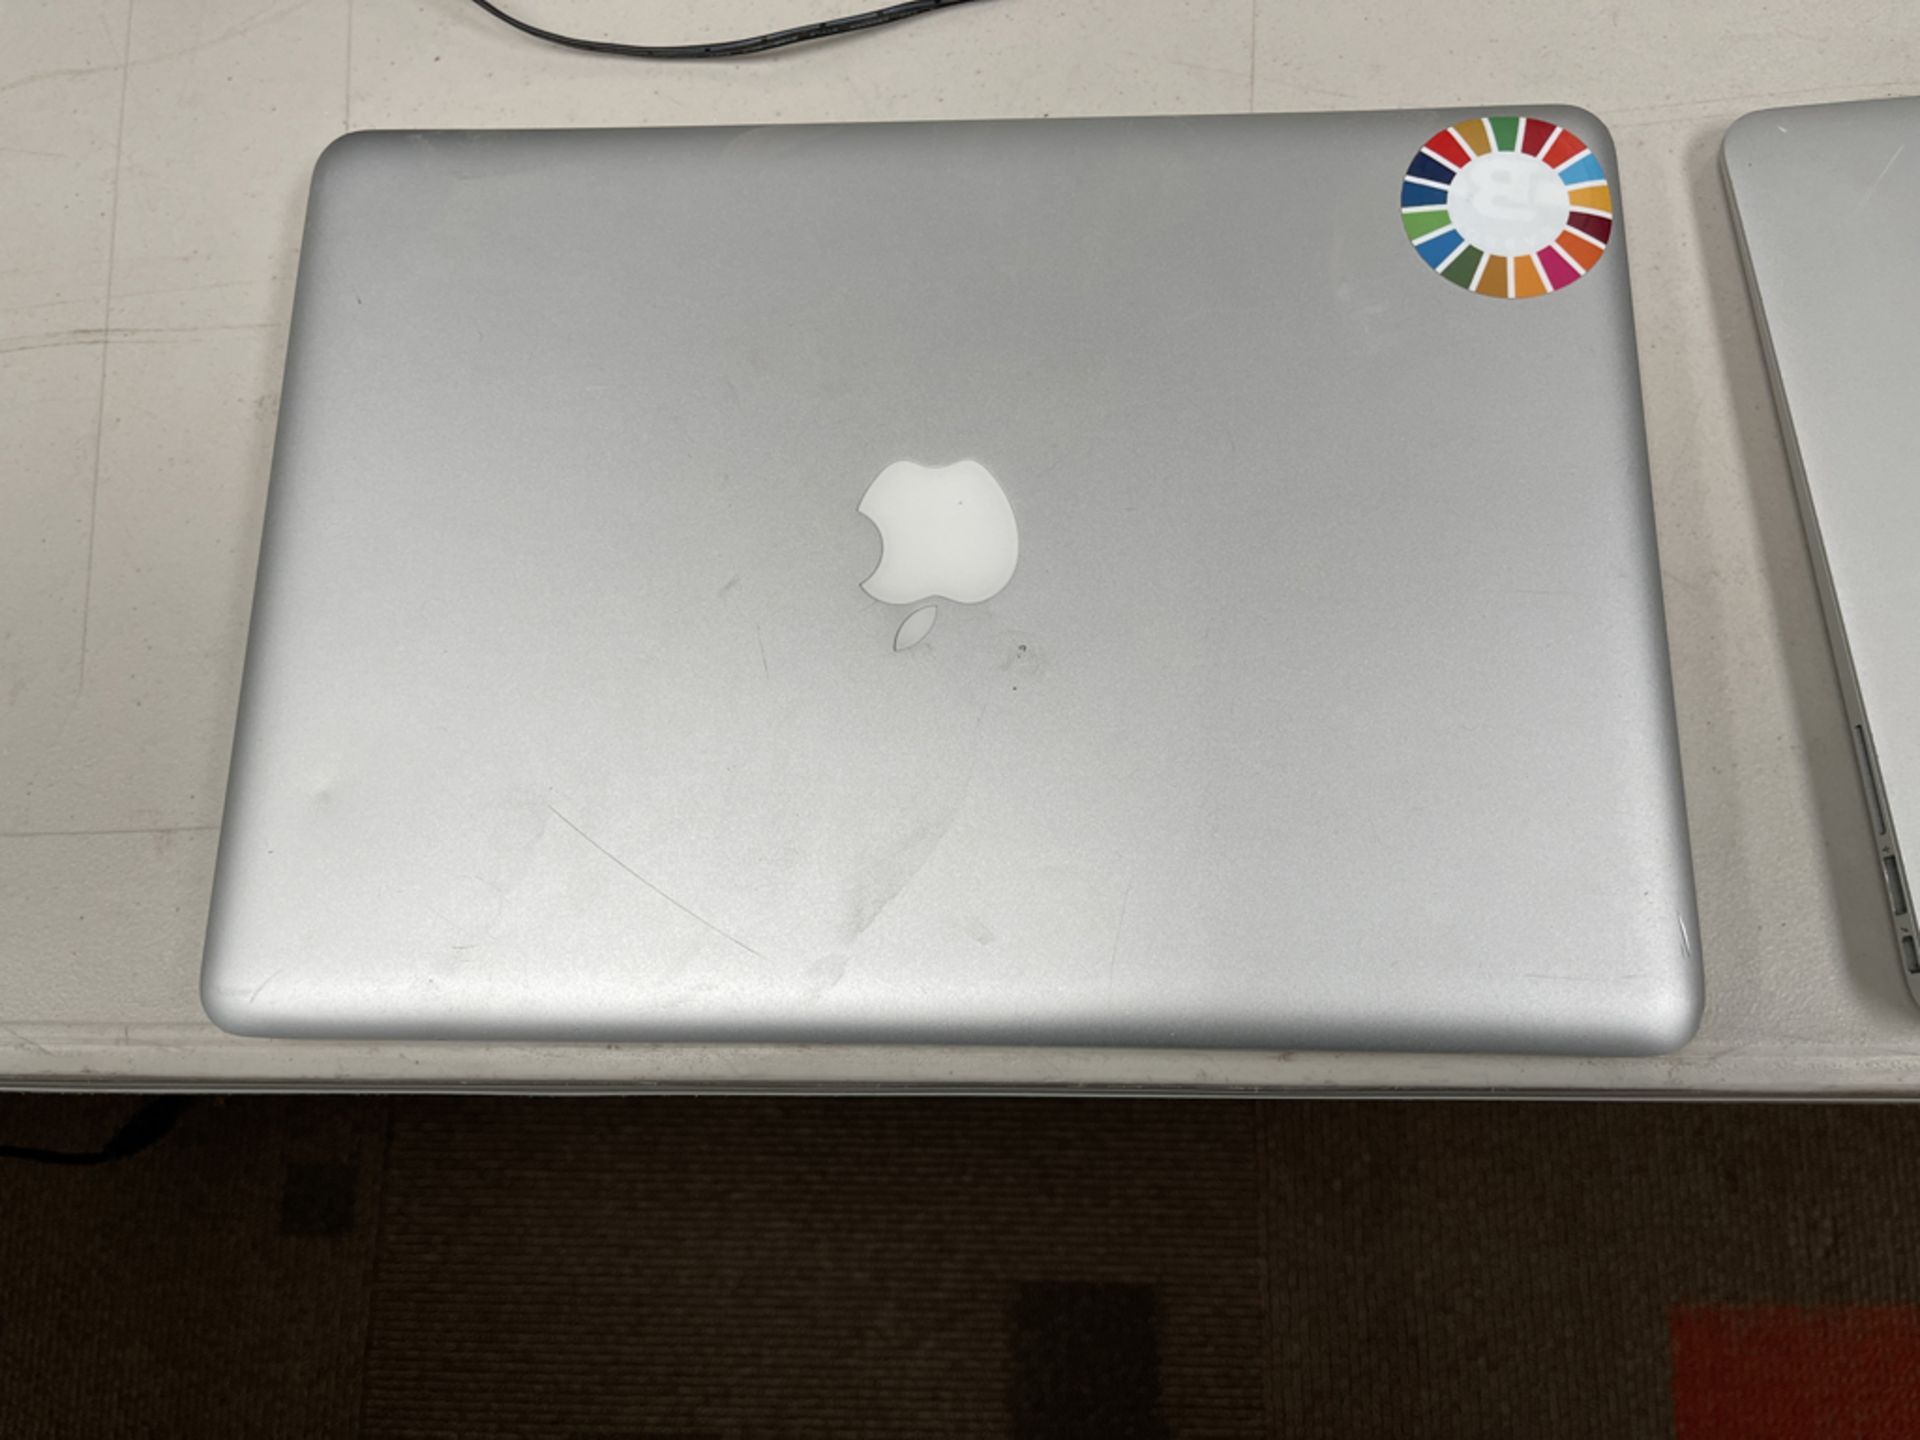 Apple MacBook Pro a1278 - No power cord - working - Image 3 of 5